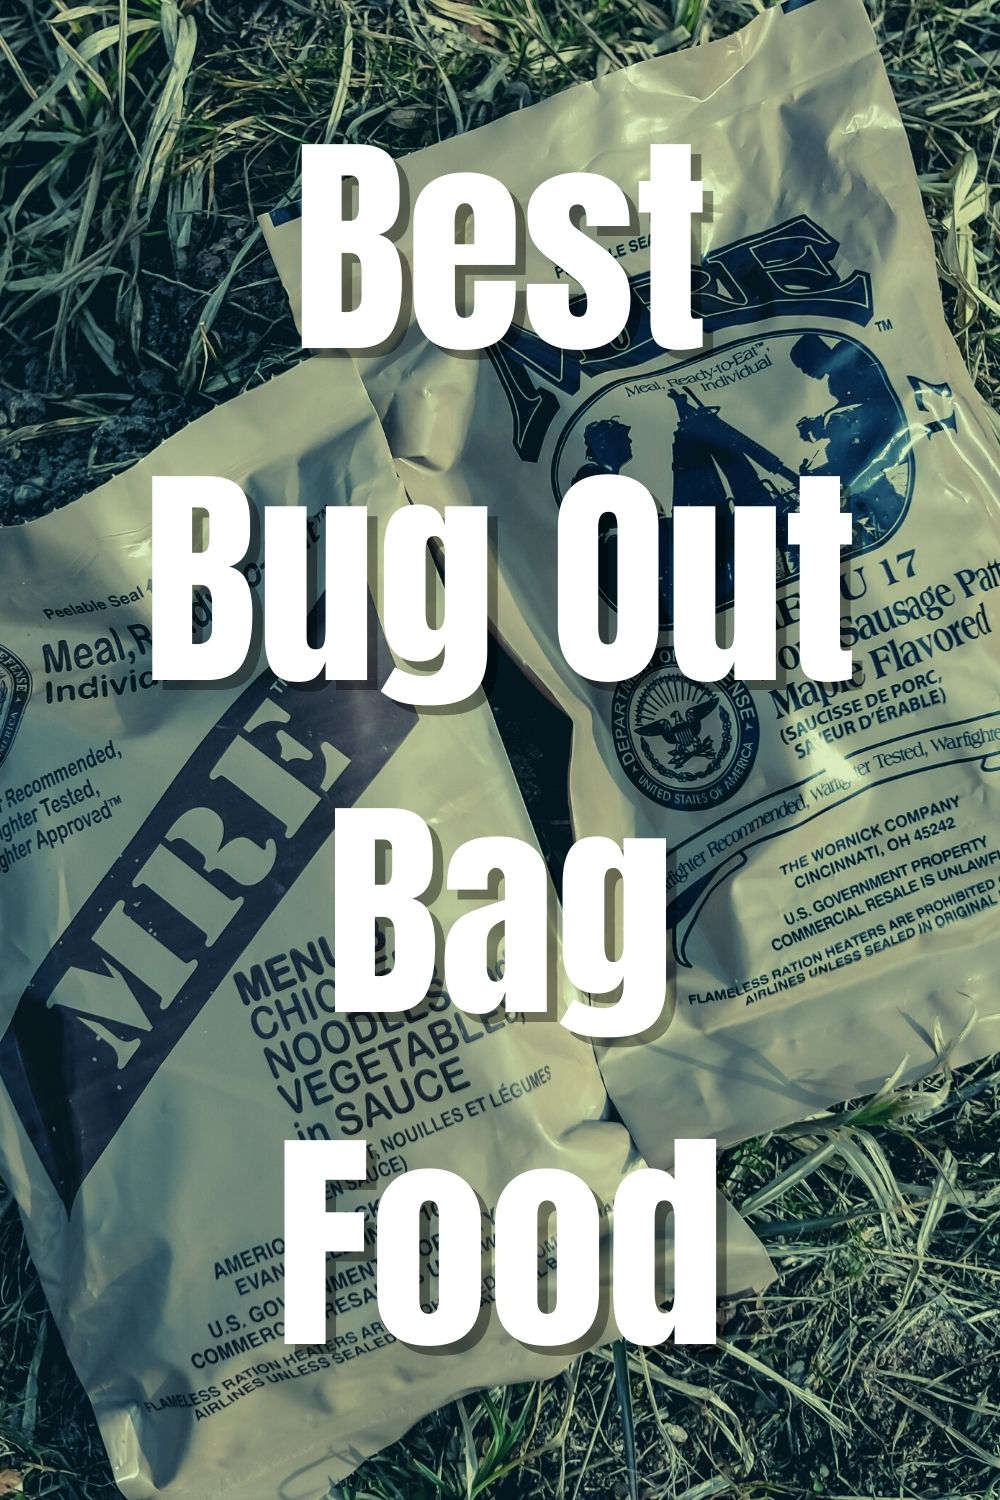 25 Best Bug Out Bag Food Items for Survival & Emergencies